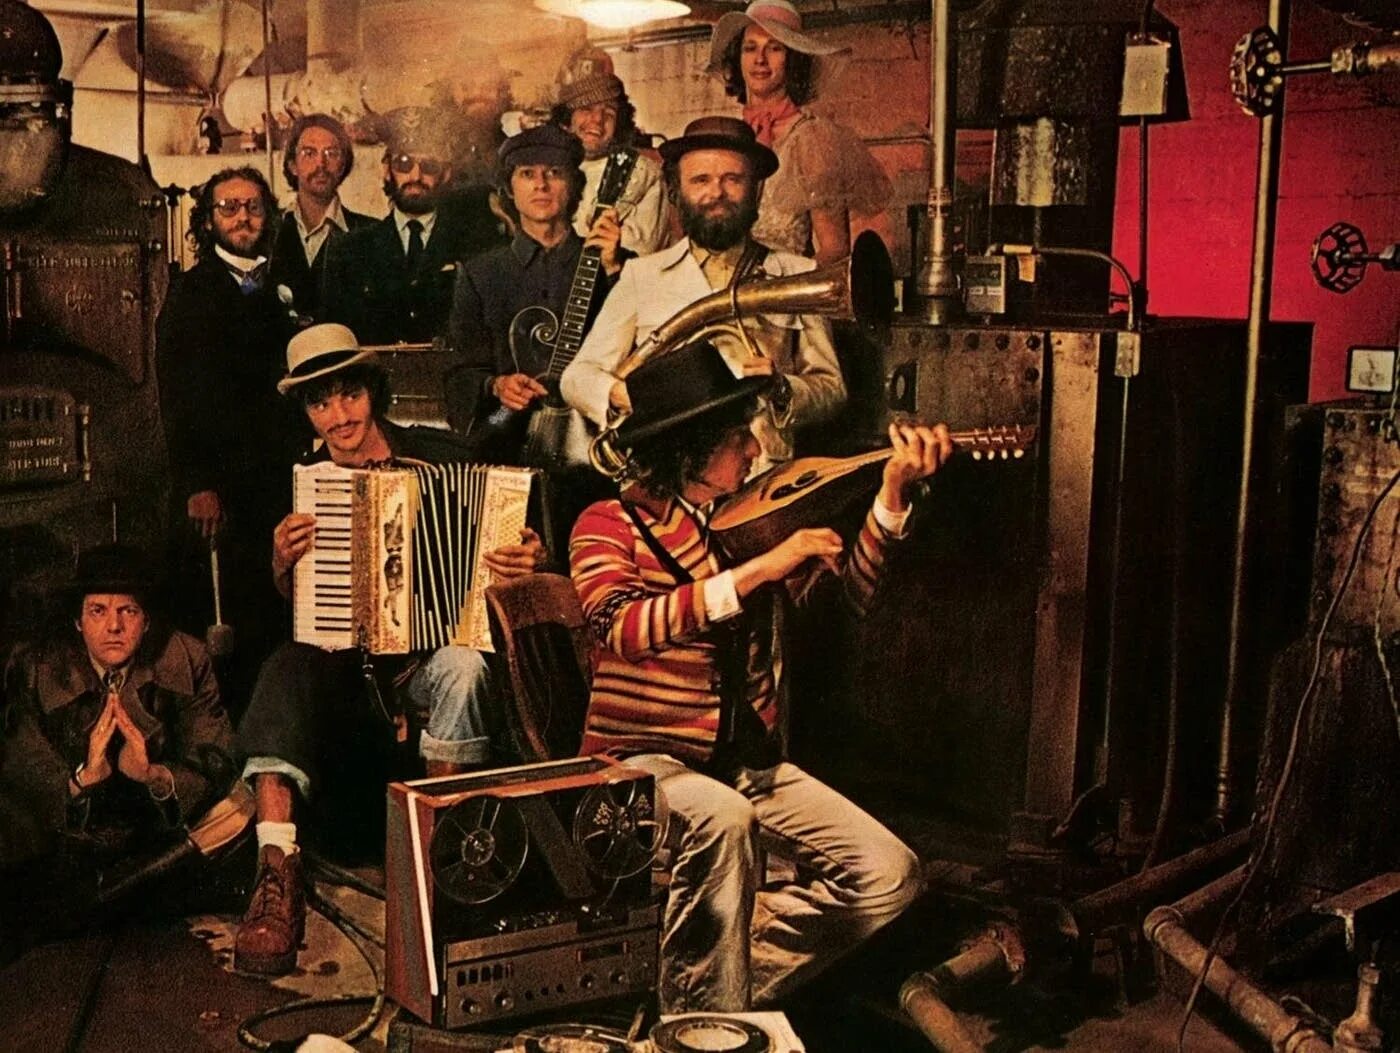 He is in the band. Bob Dylan Basement. Bob Dylan - the Basement Tapes. The Basement Tapes Боб Дилан. The Band the Basement Tapes.